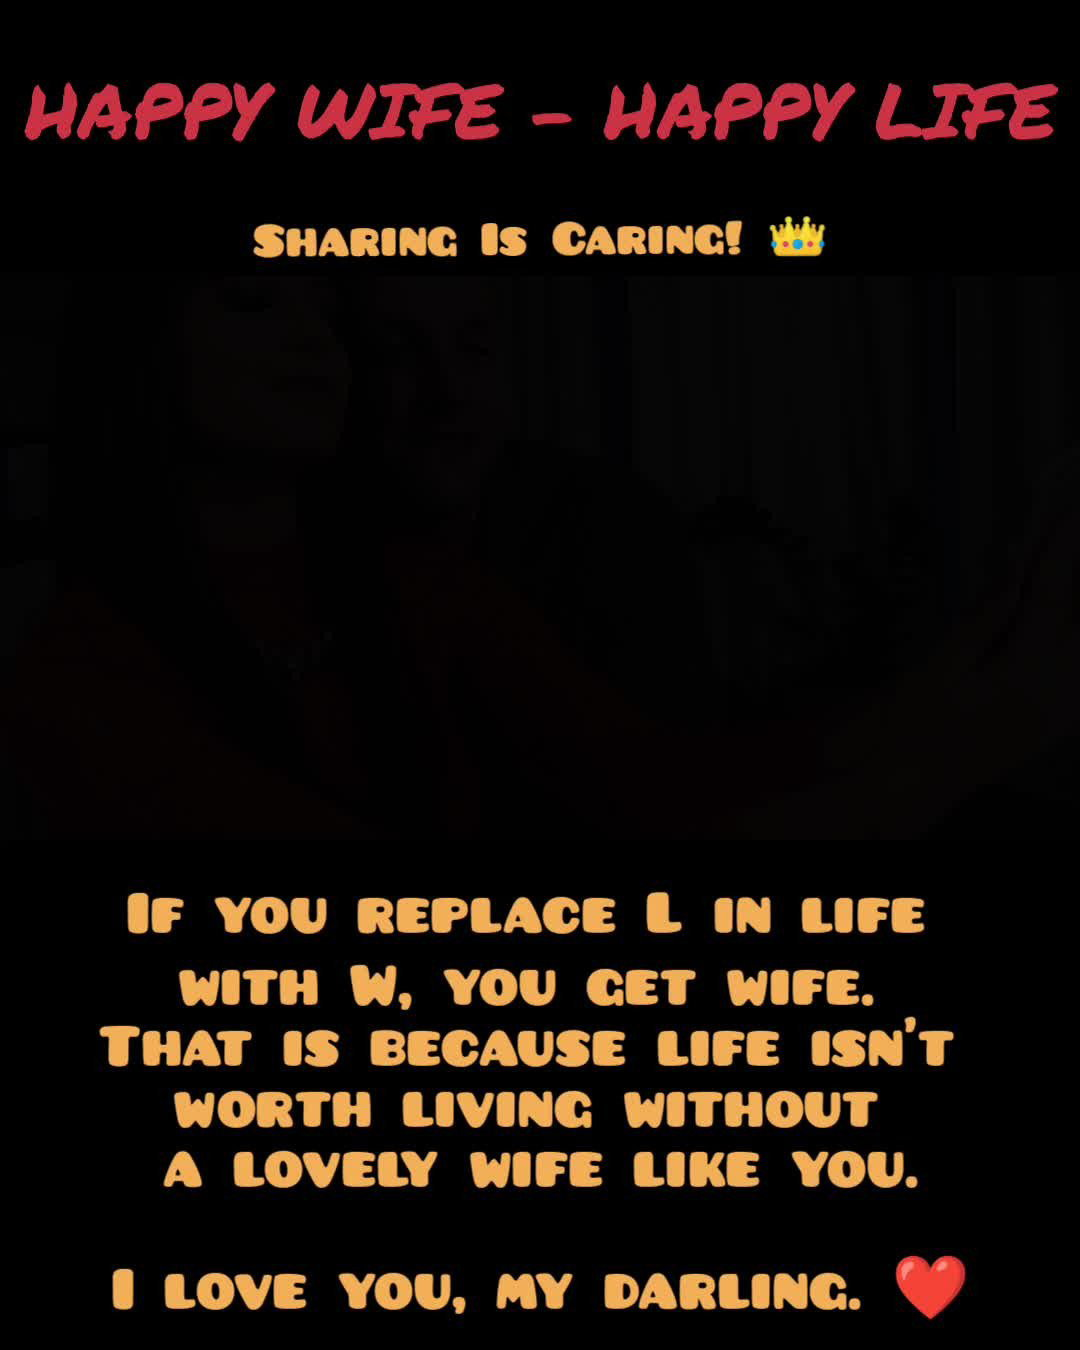 Video by THE FAITHFUL HOTWIFE with the username @TheStag-BG, who is a verified user,  November 24, 2022 at 1:34 PM. The post is about the topic Hotwife and the text says '"The Hotwife Lifestyle!" #SharingIsCaring ❤️
#Hotwife #Cuckold #Sharing #Swingers #Slutwife #NFSW
[#THESTAG 🦌] [#SURPRISE 🎁] #HOTWIFING 👑'